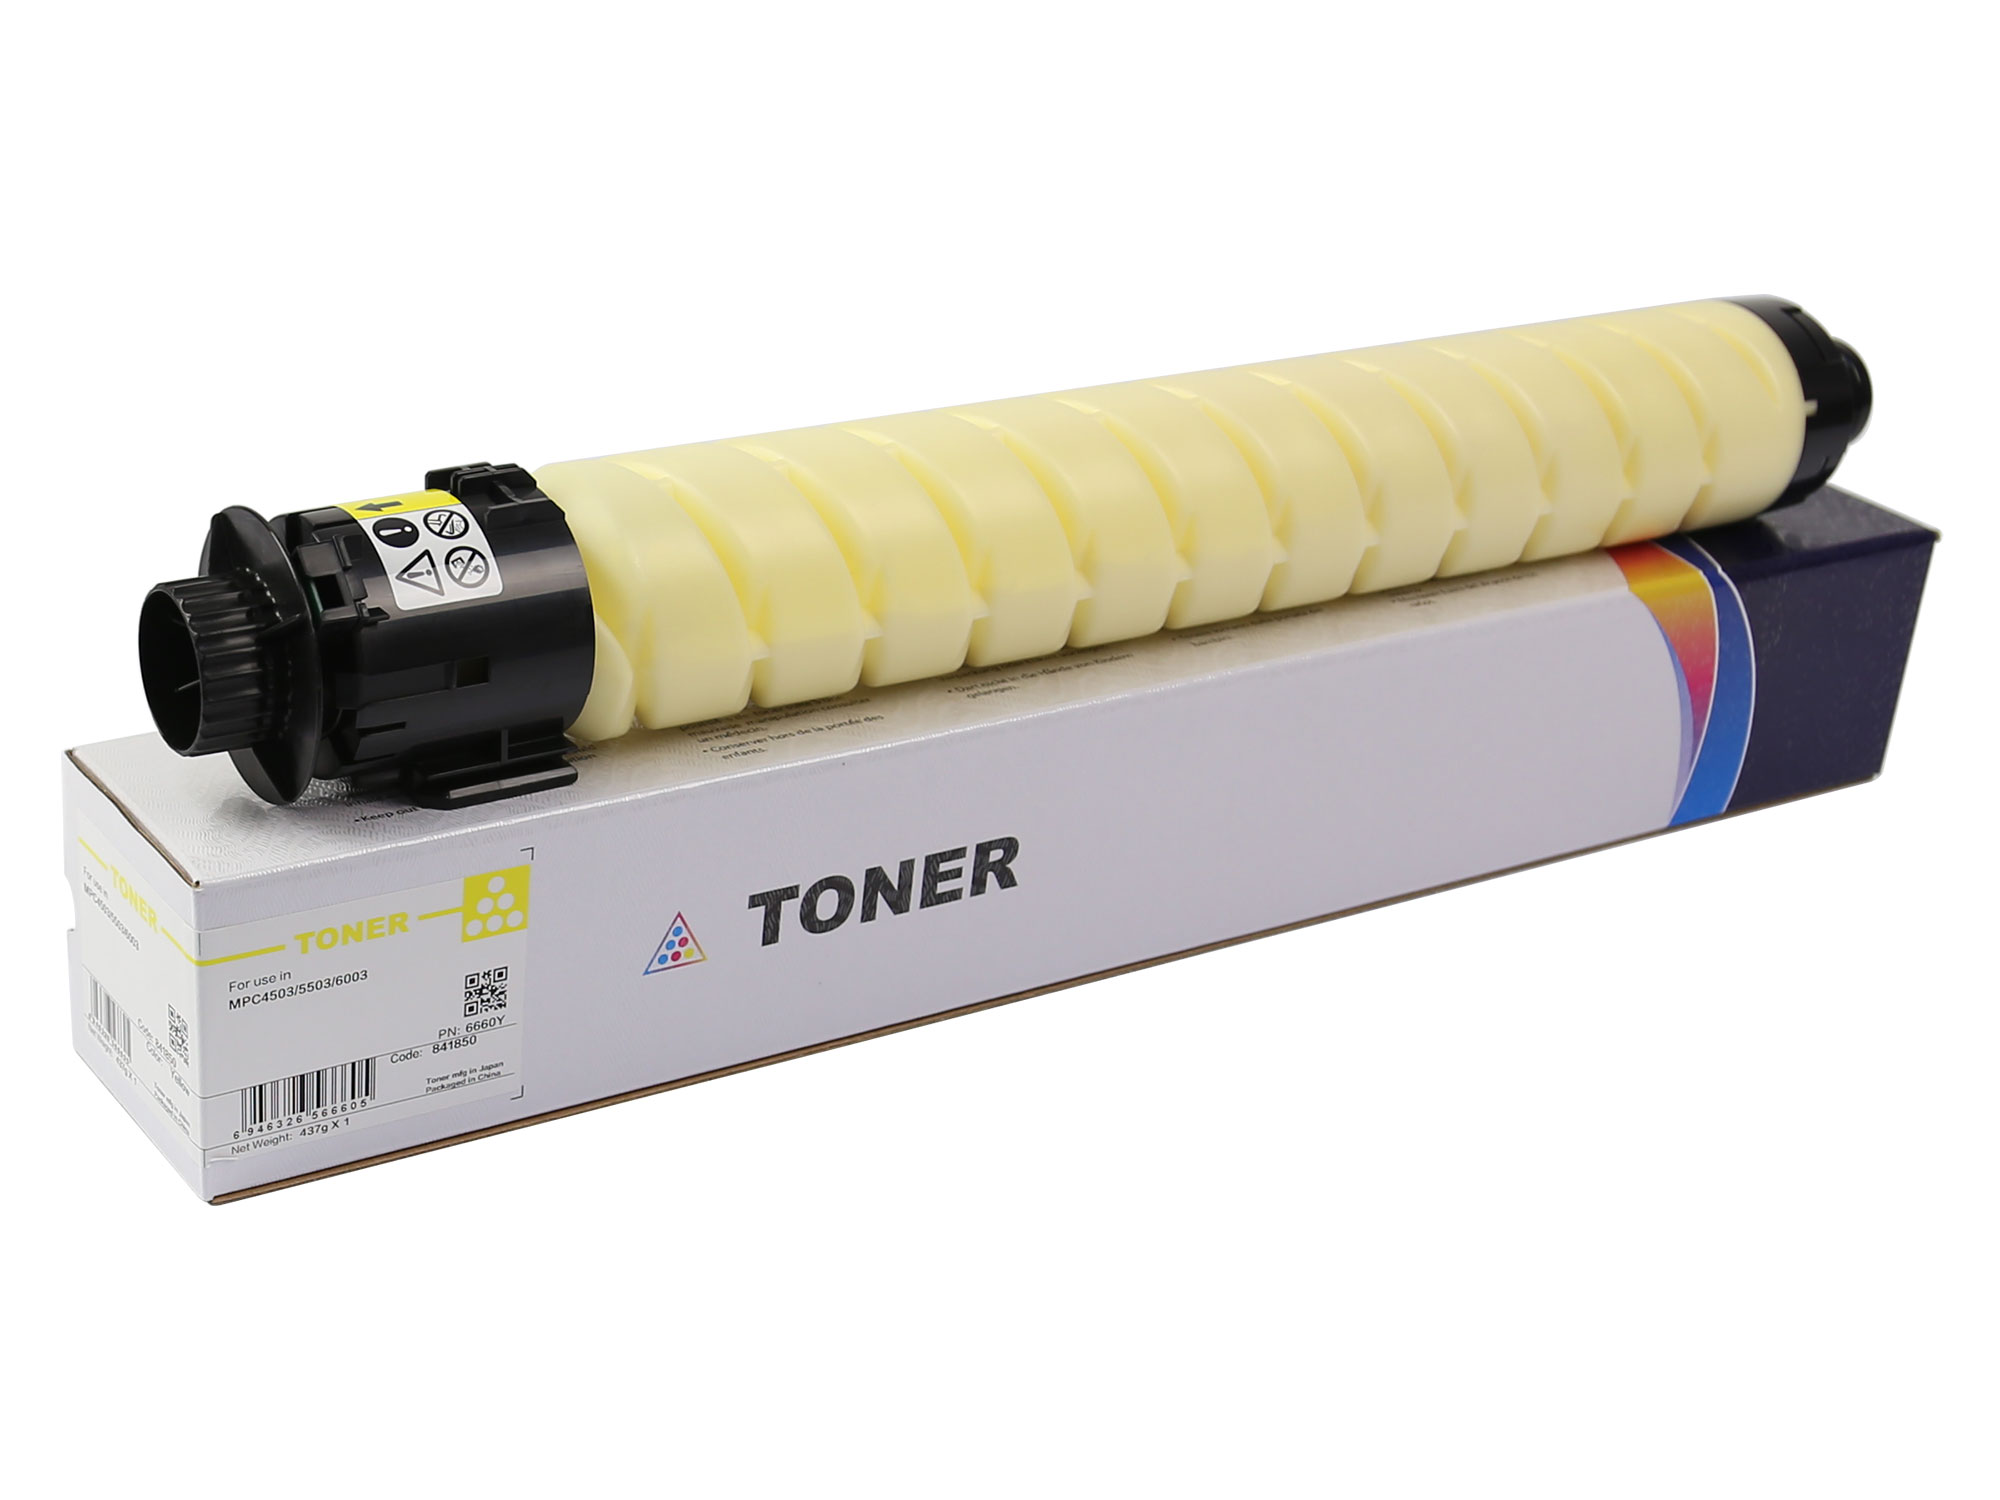 841850 CPP Yellow Toner Cartridge for Ricoh MPC4503